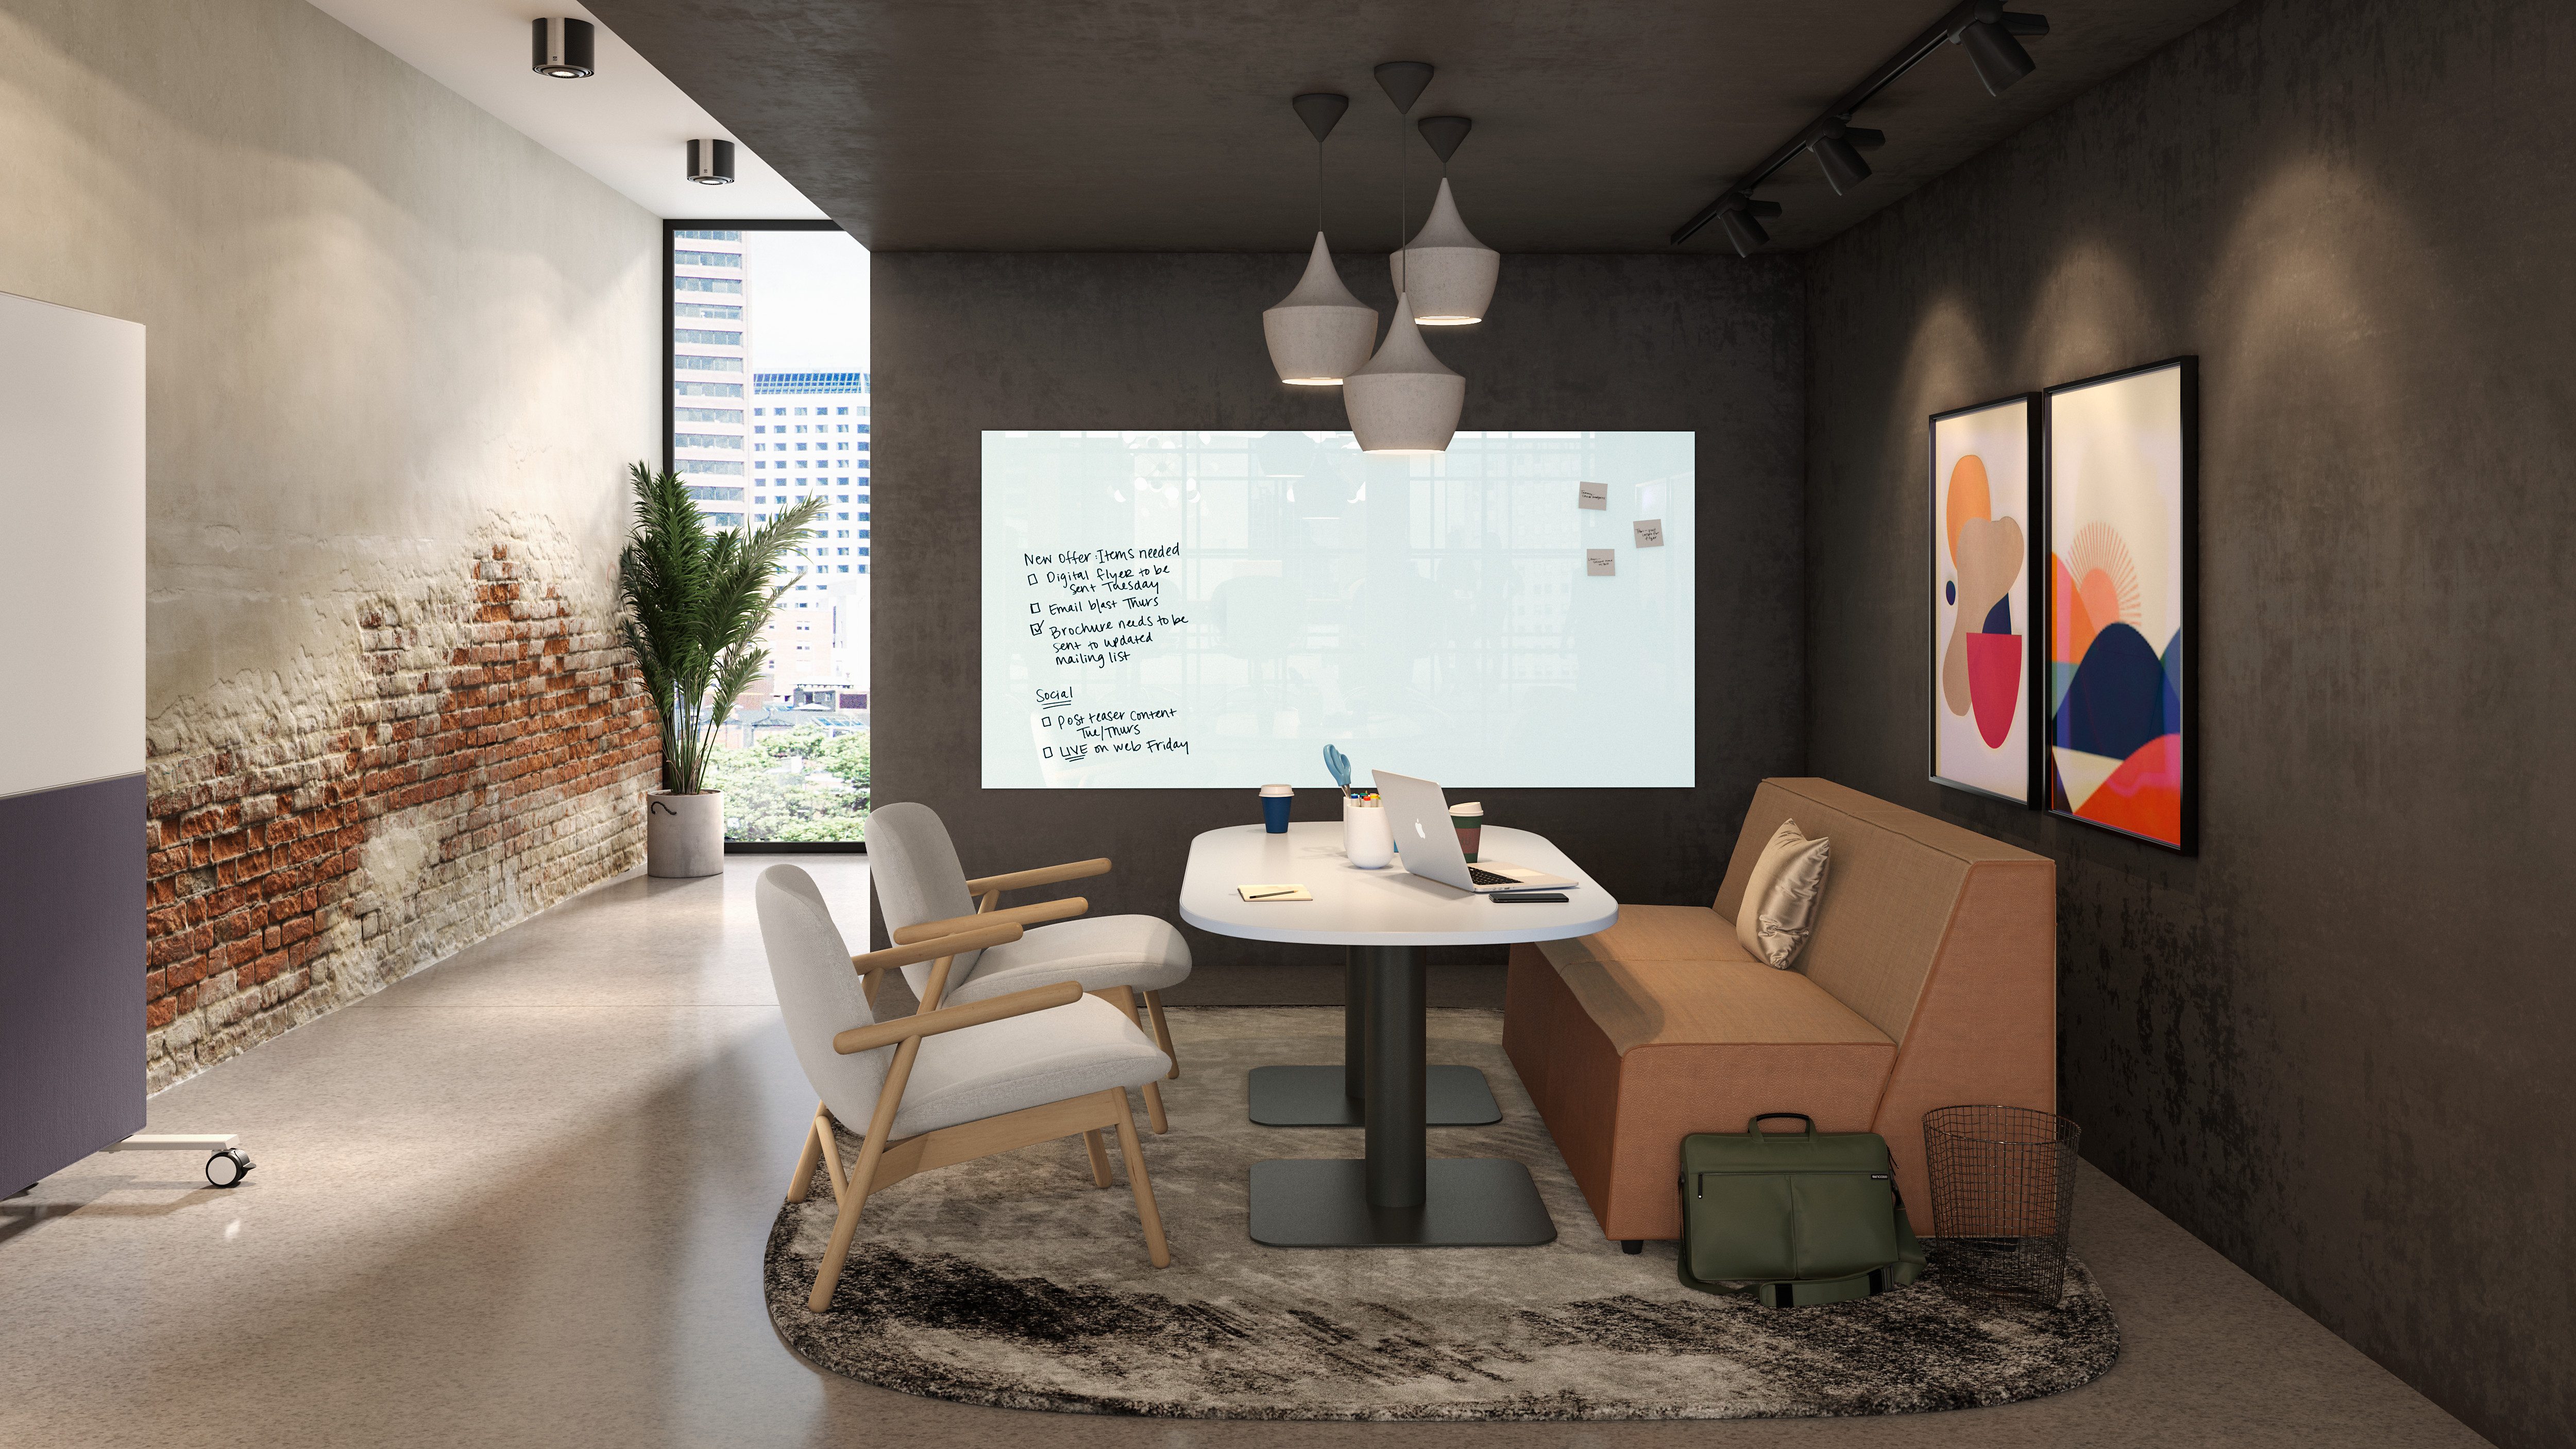 CG Photorealistic Rendering created by PIX-US.Glassboard for Collaborative